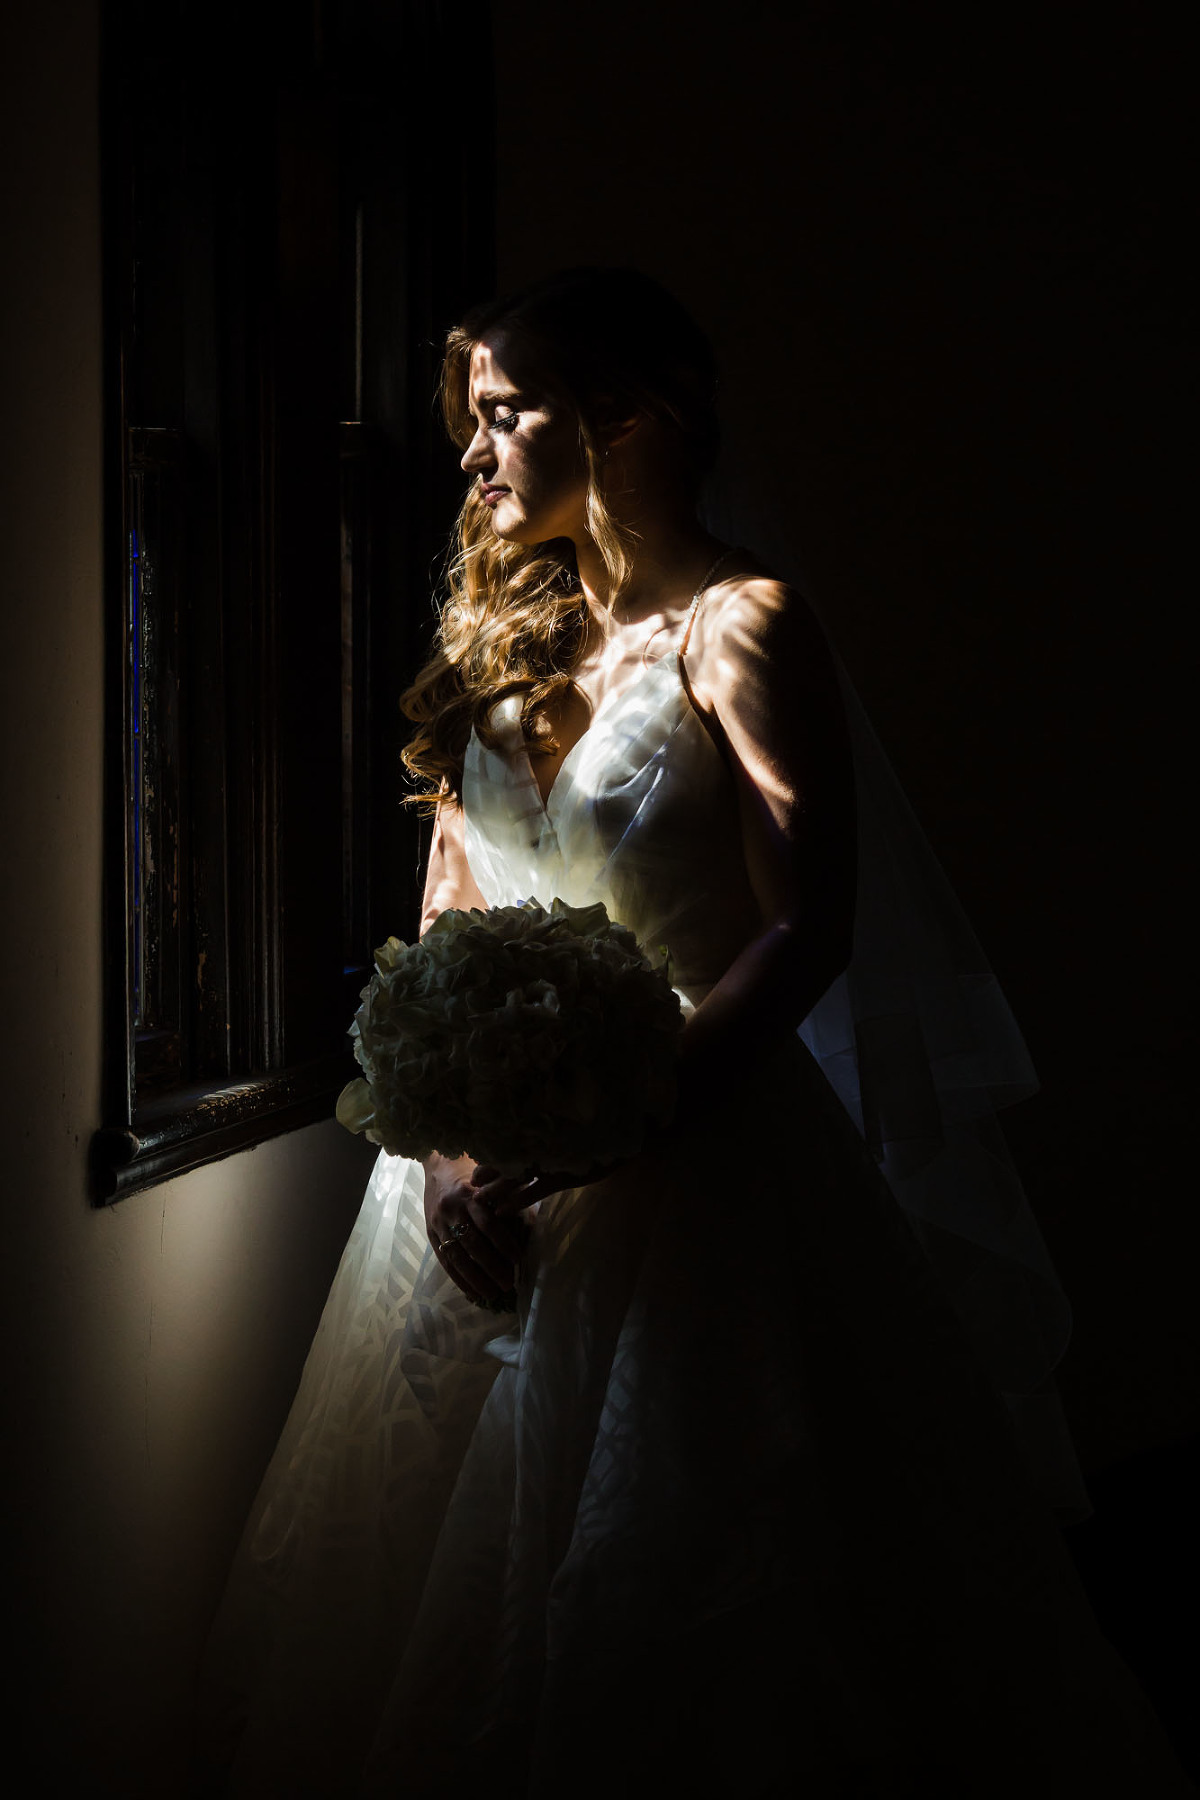 bride standing at the window, in spotty light. dramatic high contrast profile photo